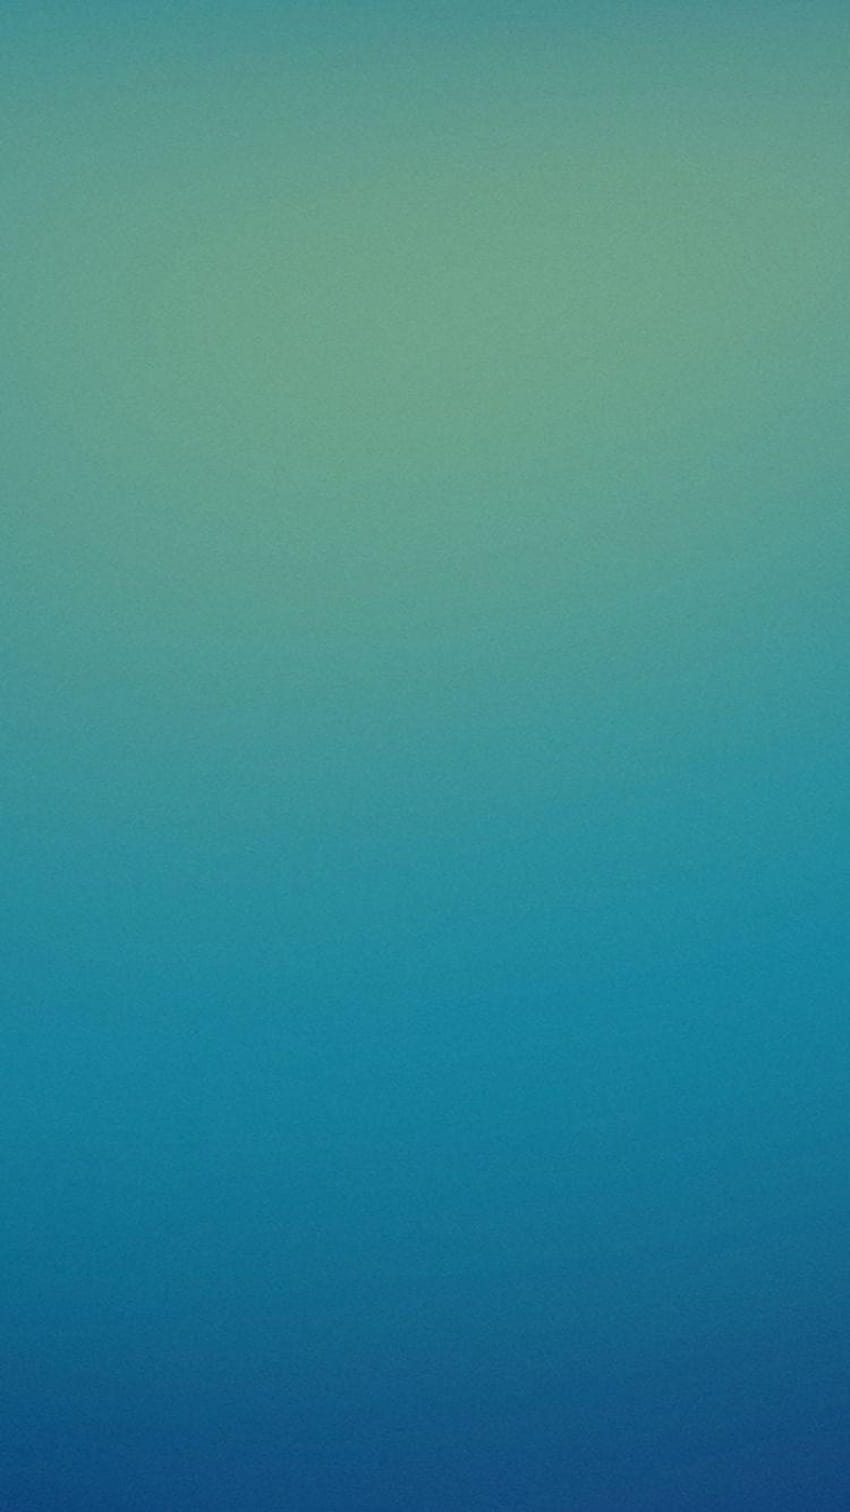 Solid Color For Iphone, plain color iphone HD phone wallpaper